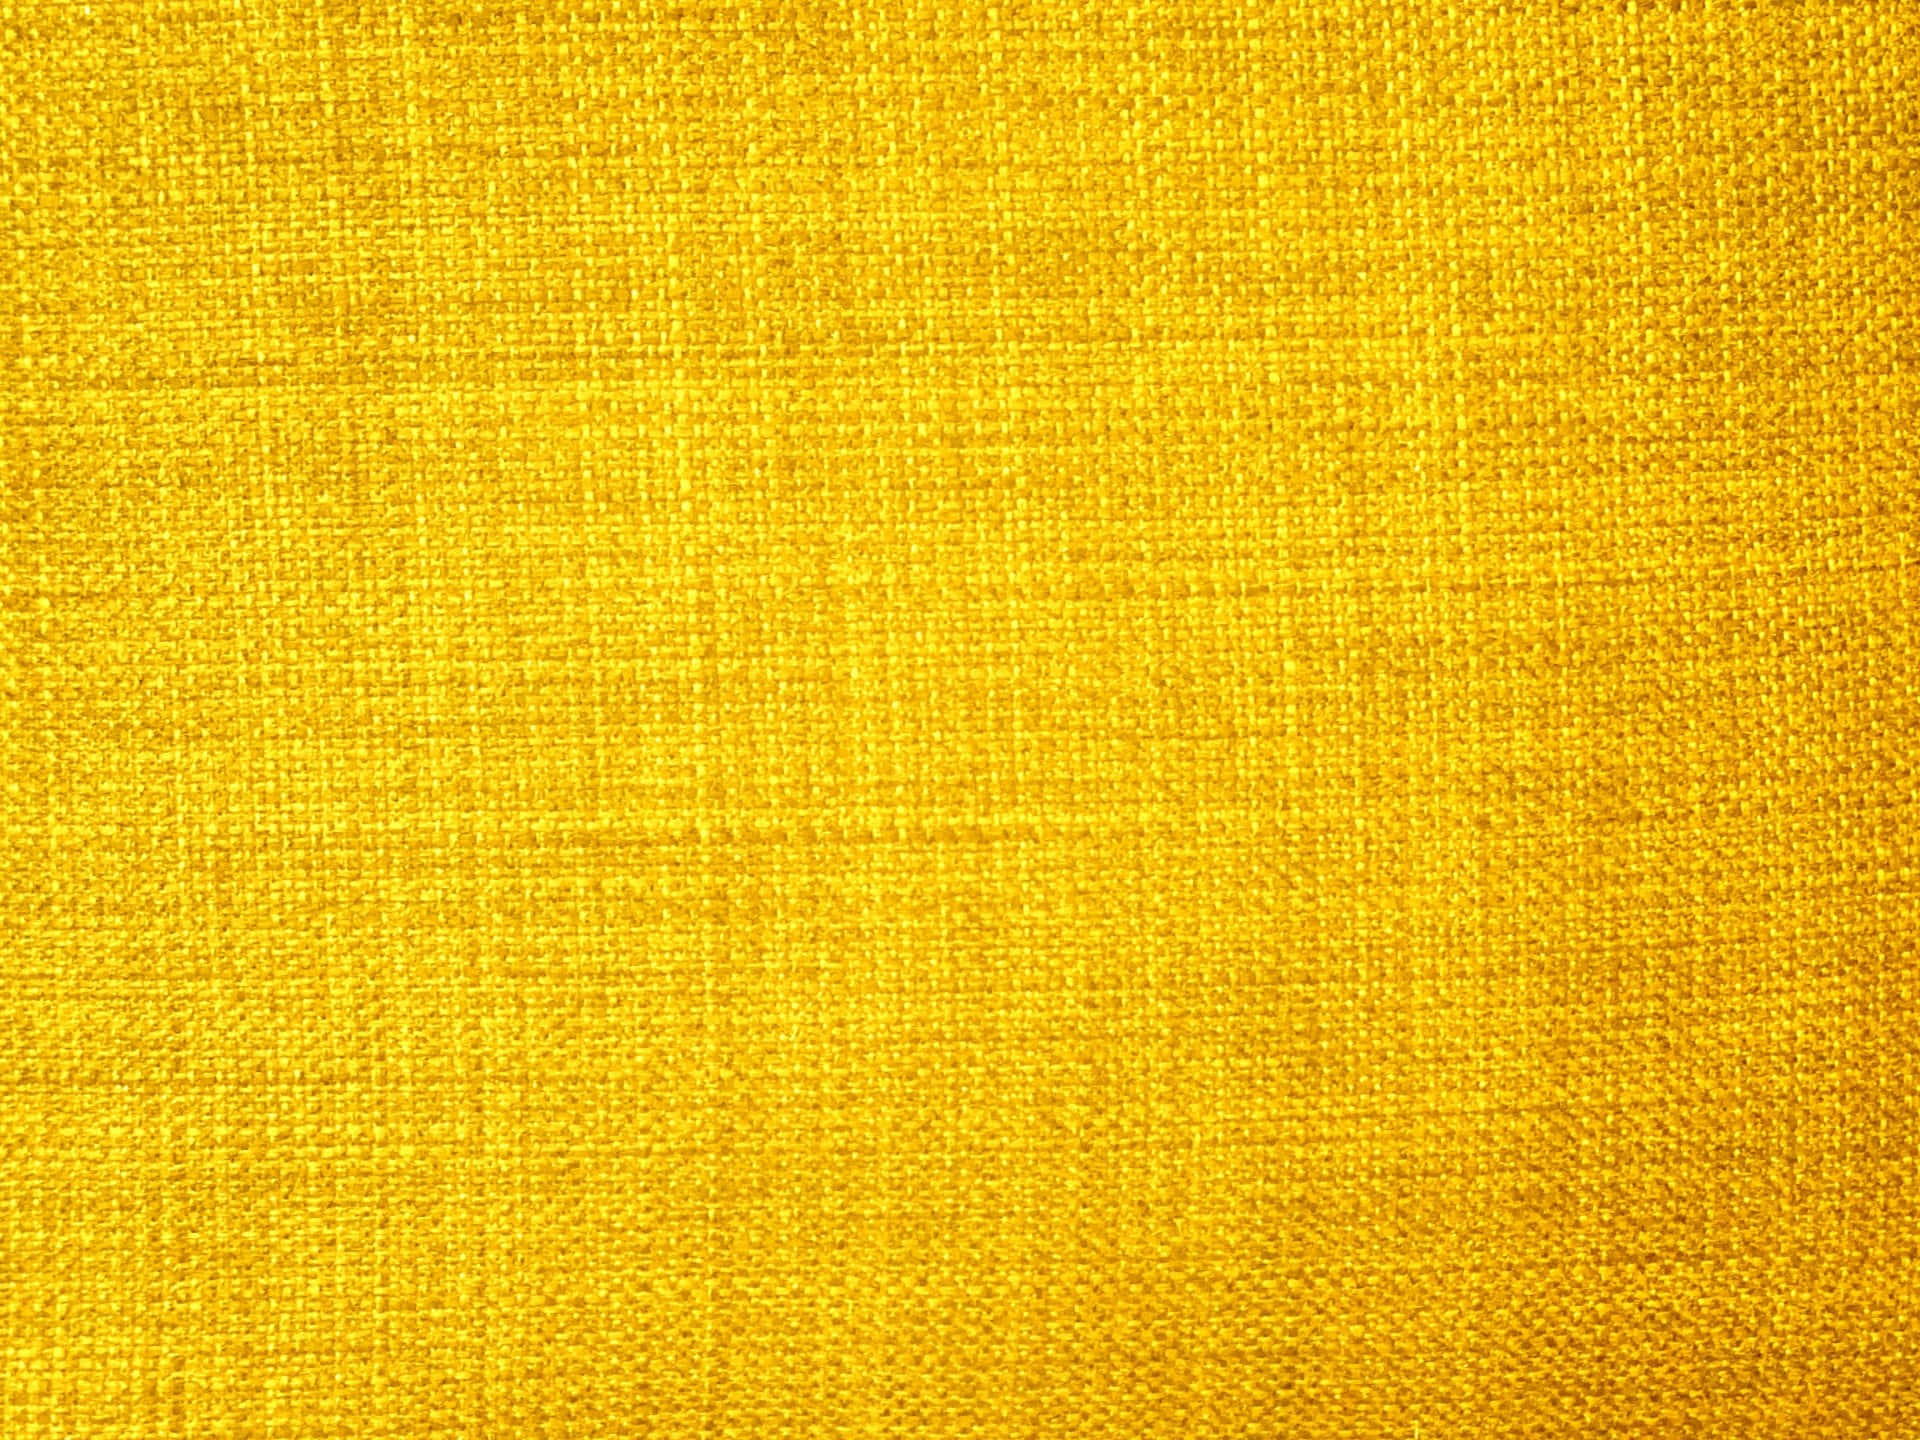 A bright yellow texture background to brighten up your day.